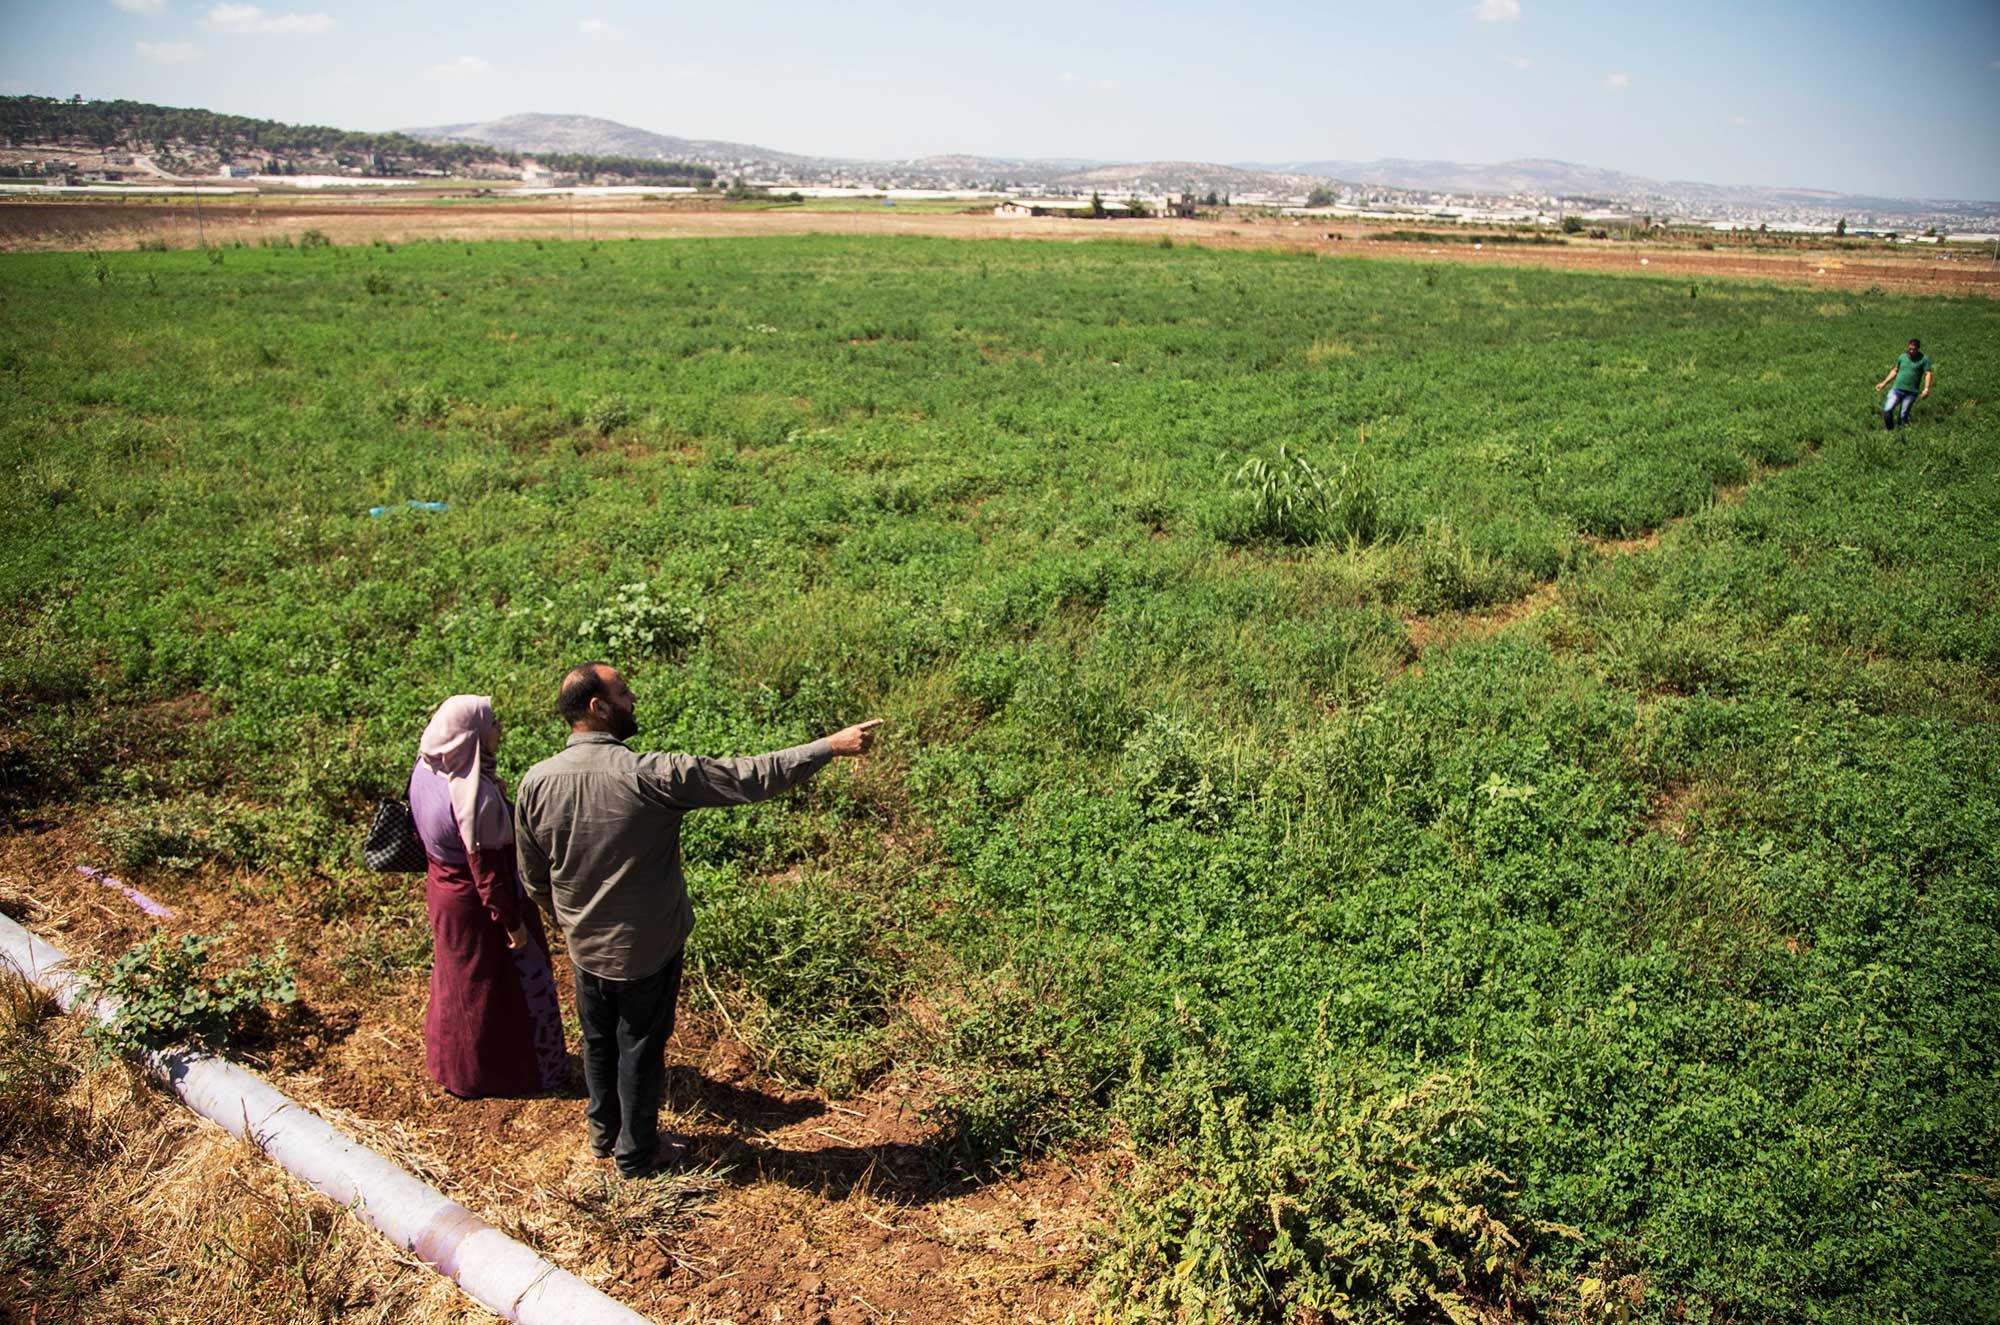 Recycled water irrigation is part of our plan to protect the environment in Lebanon and Palestine.